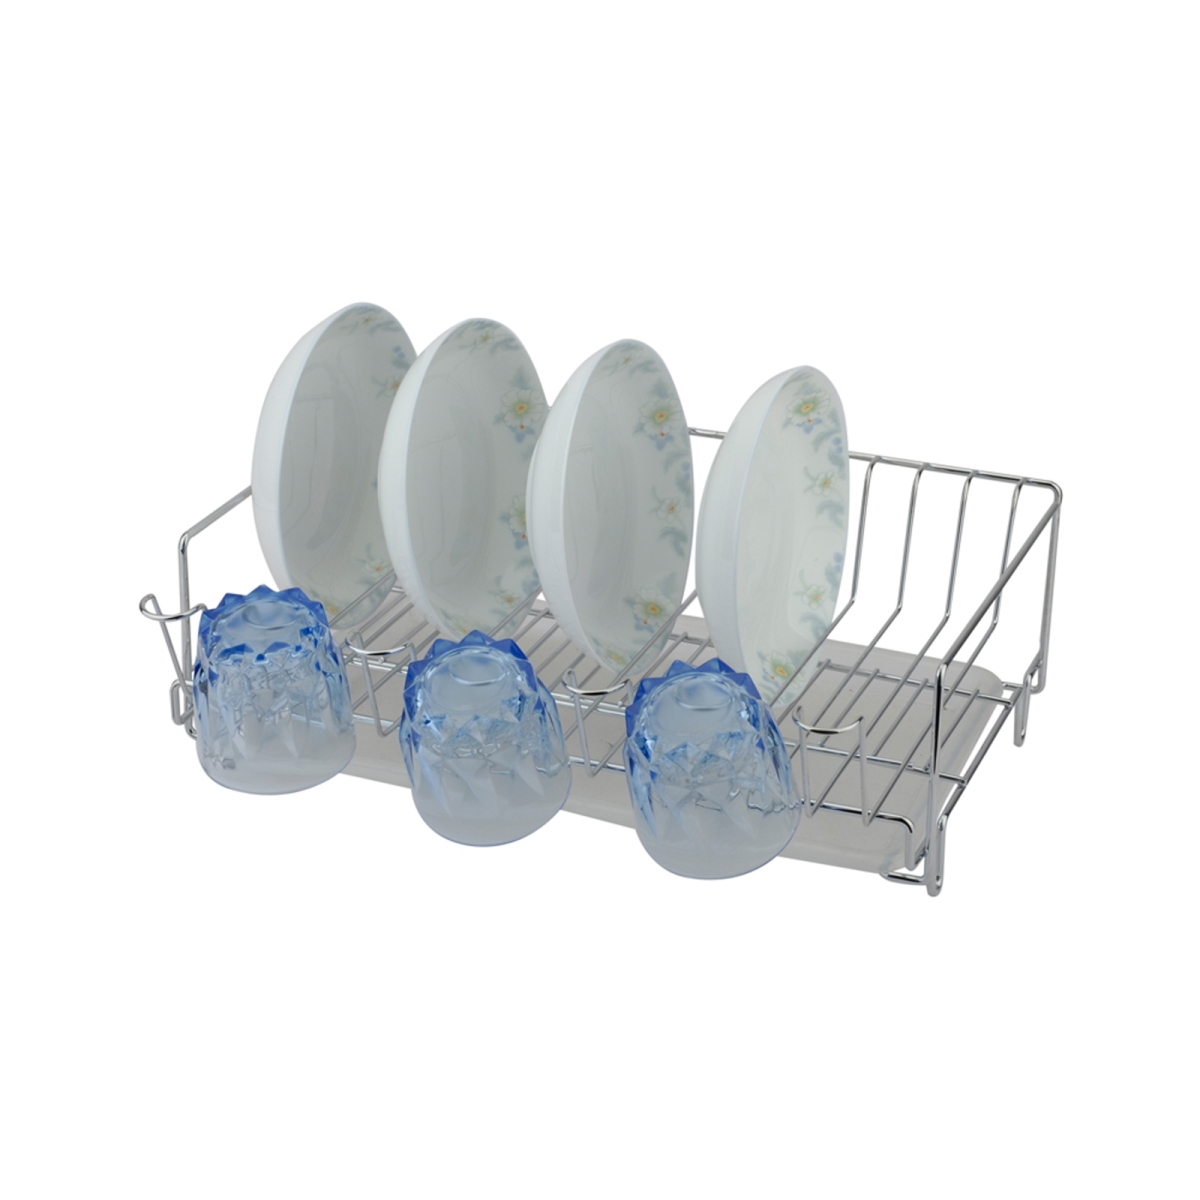 Dr-1501 15 In. Dish Rack